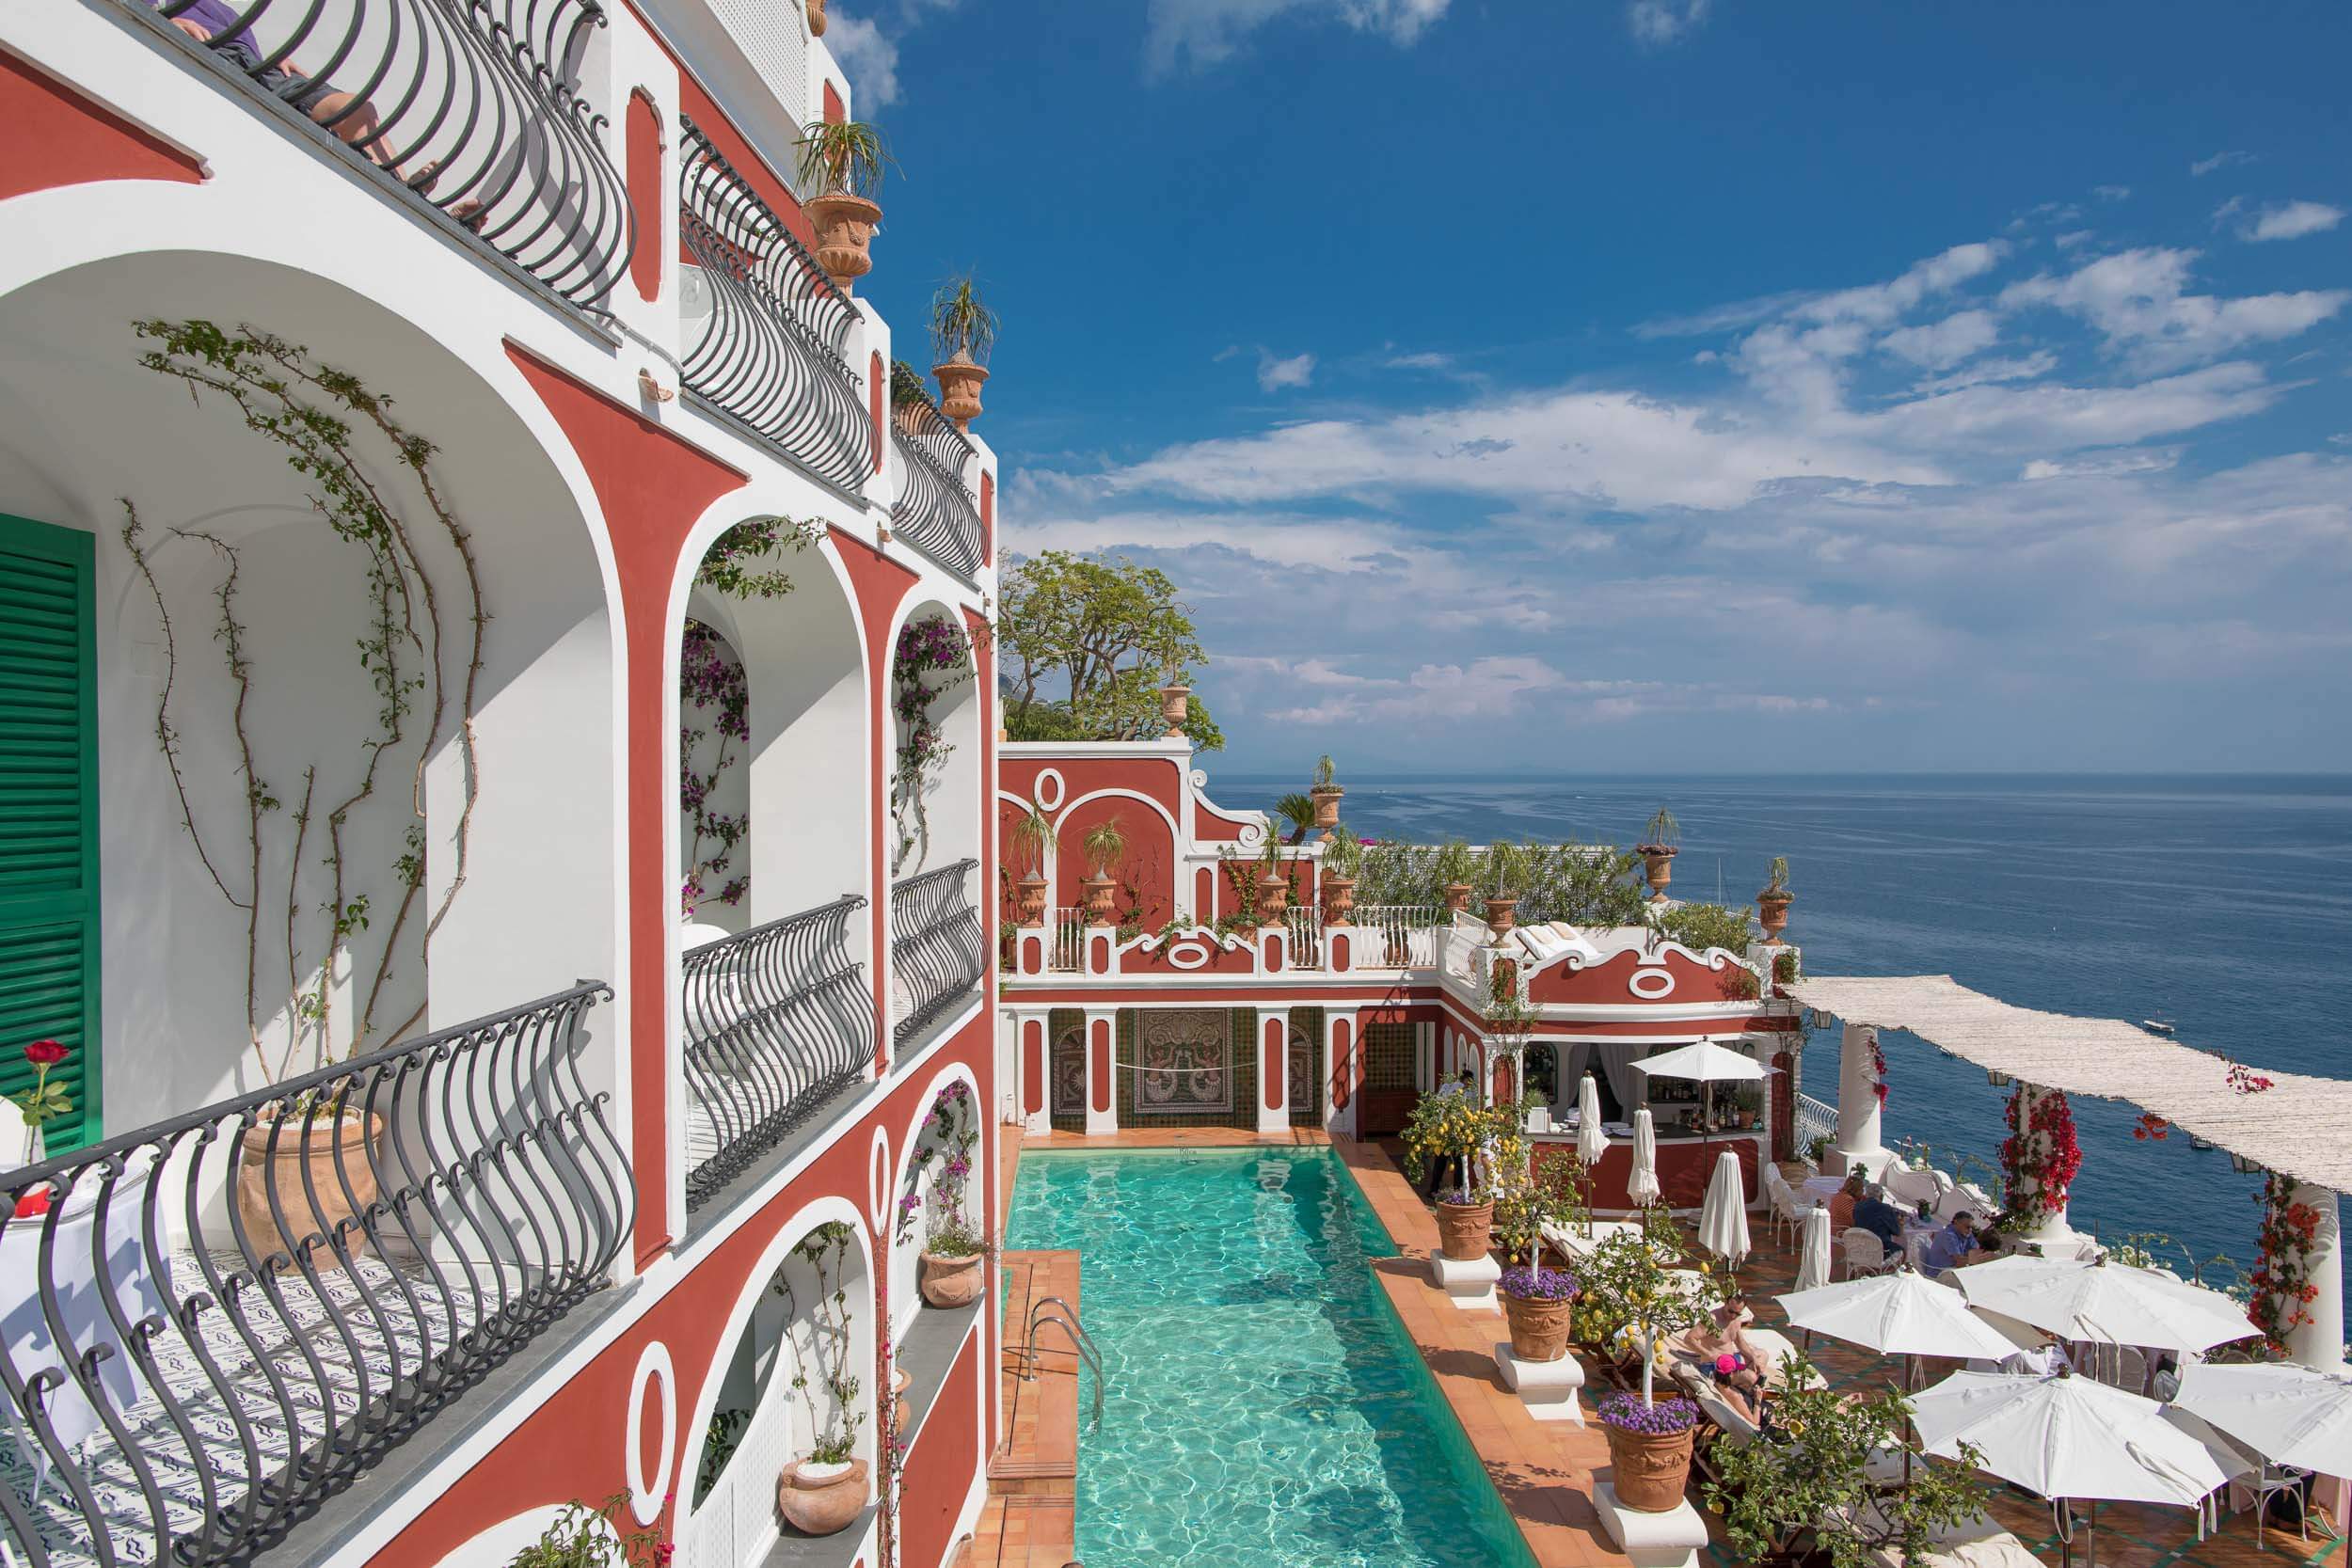 The best Positano hotel with pool - Le Sirenuse